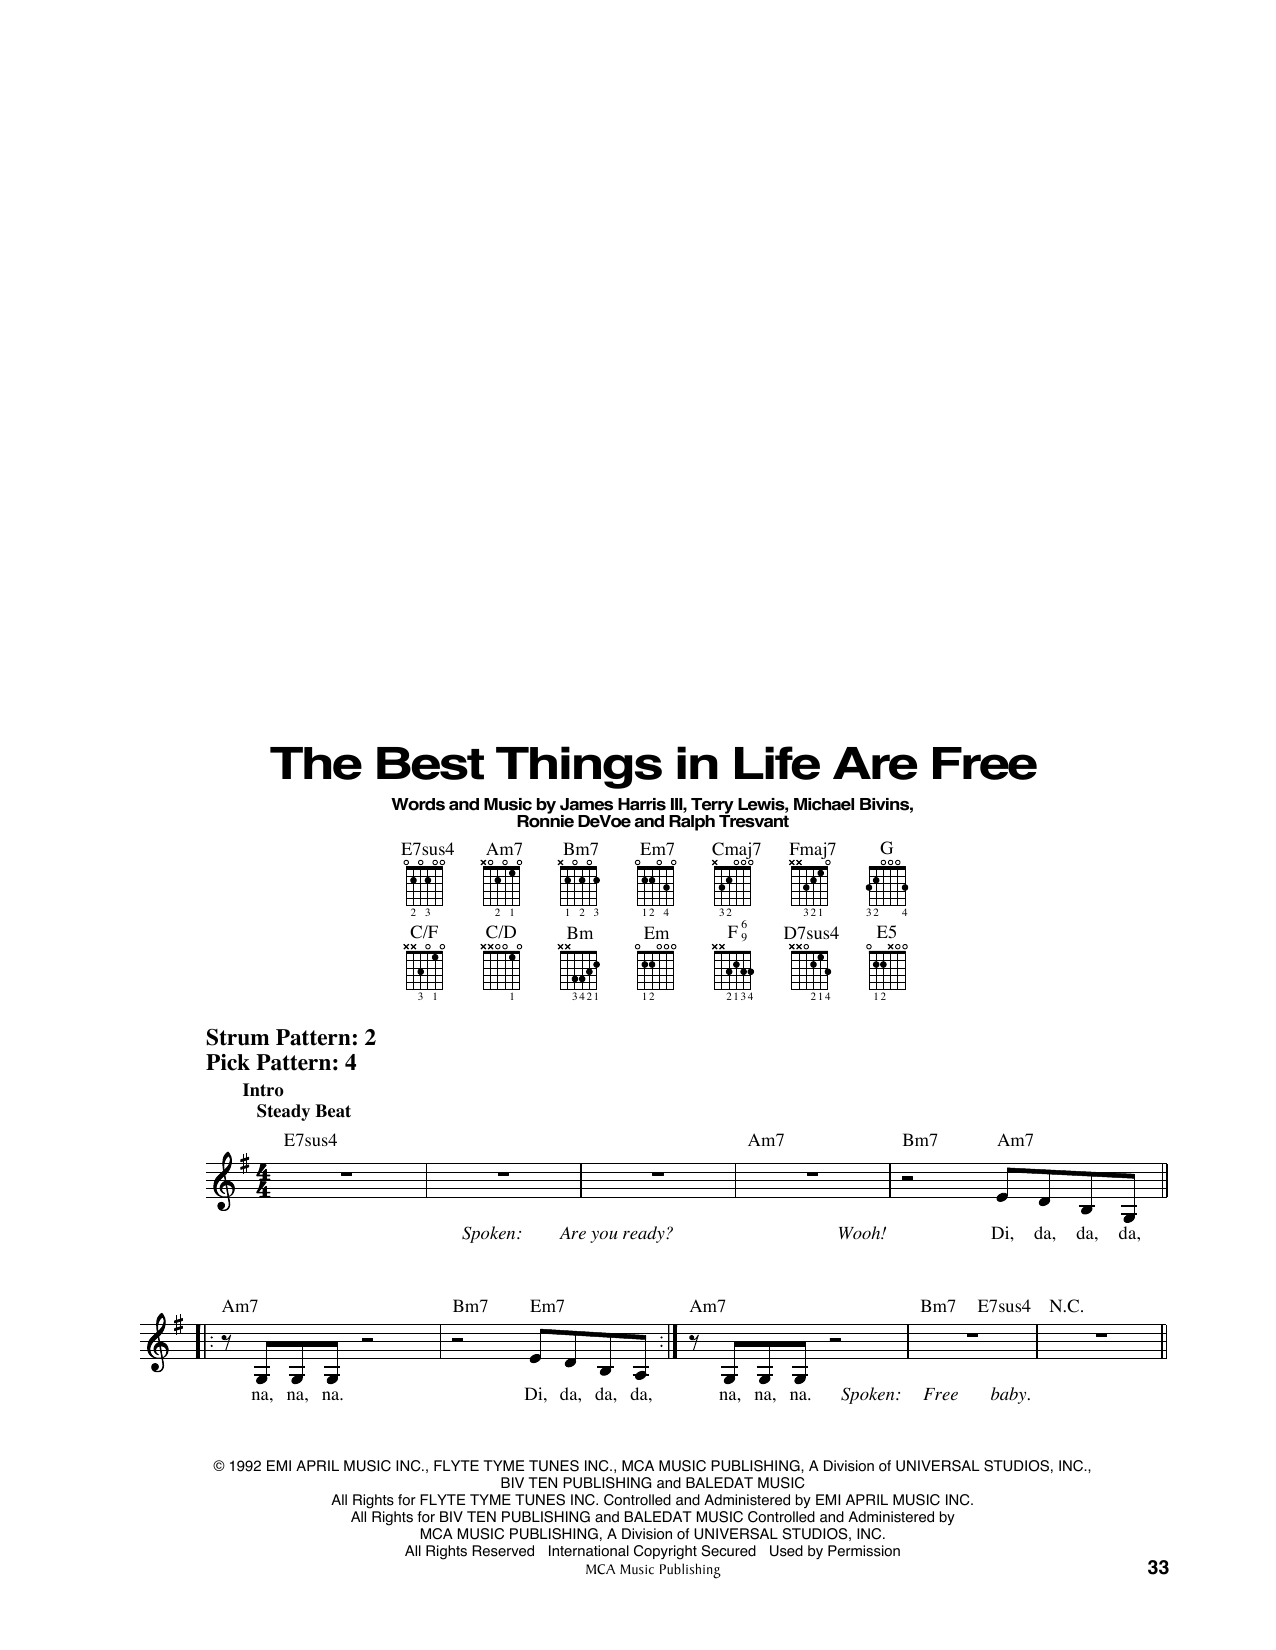 Download Luther Vandross & Janet Jackson The Best Things In Life Are Free (from Sheet Music